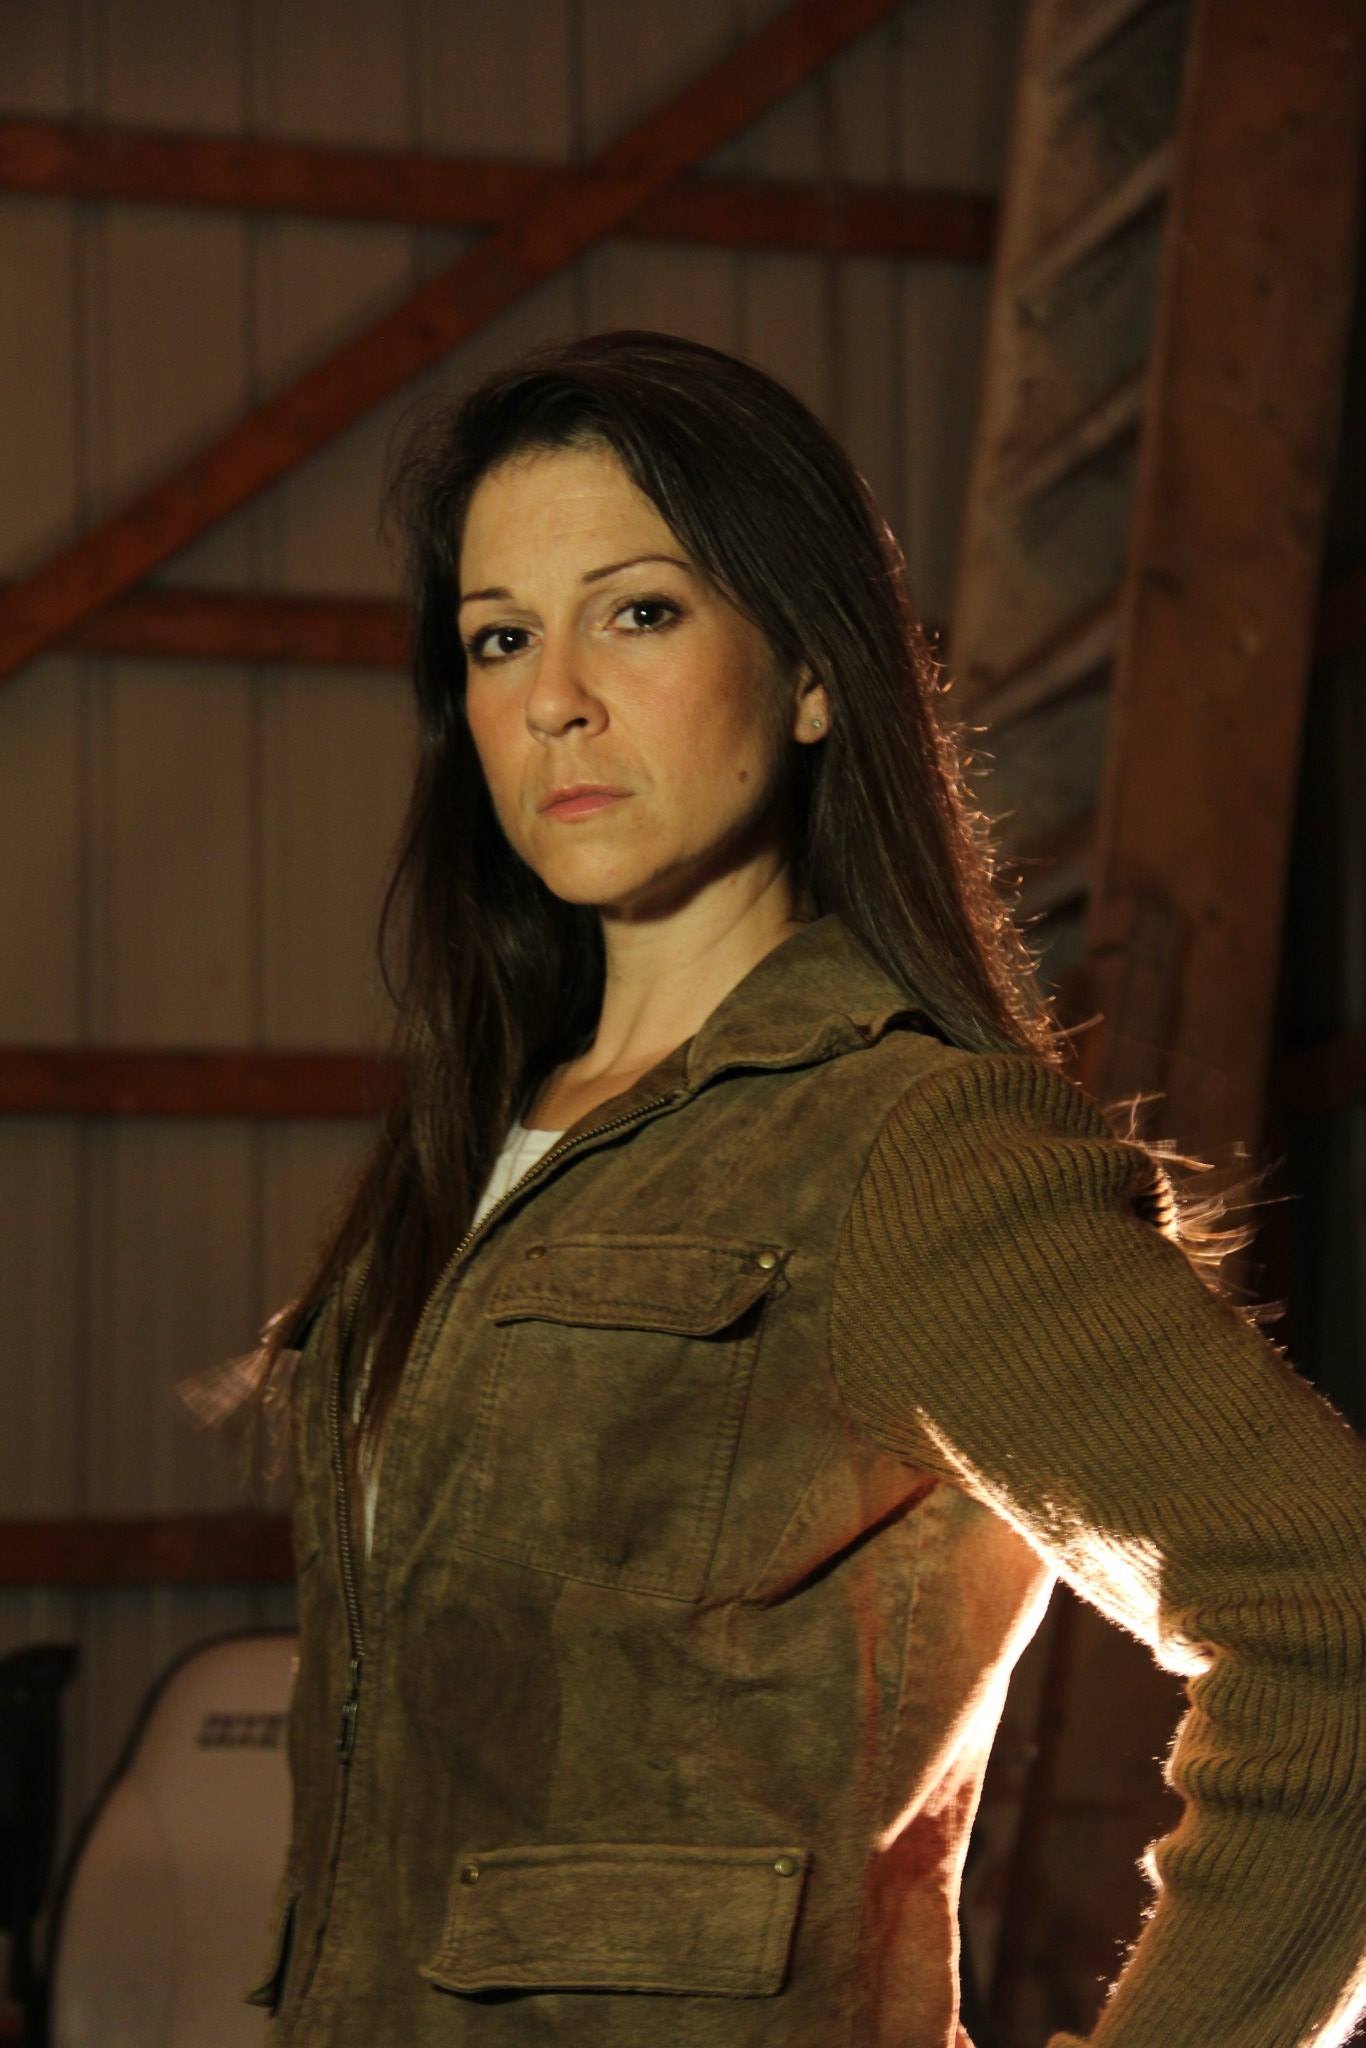 Promo shot of the character Katrina for the film 